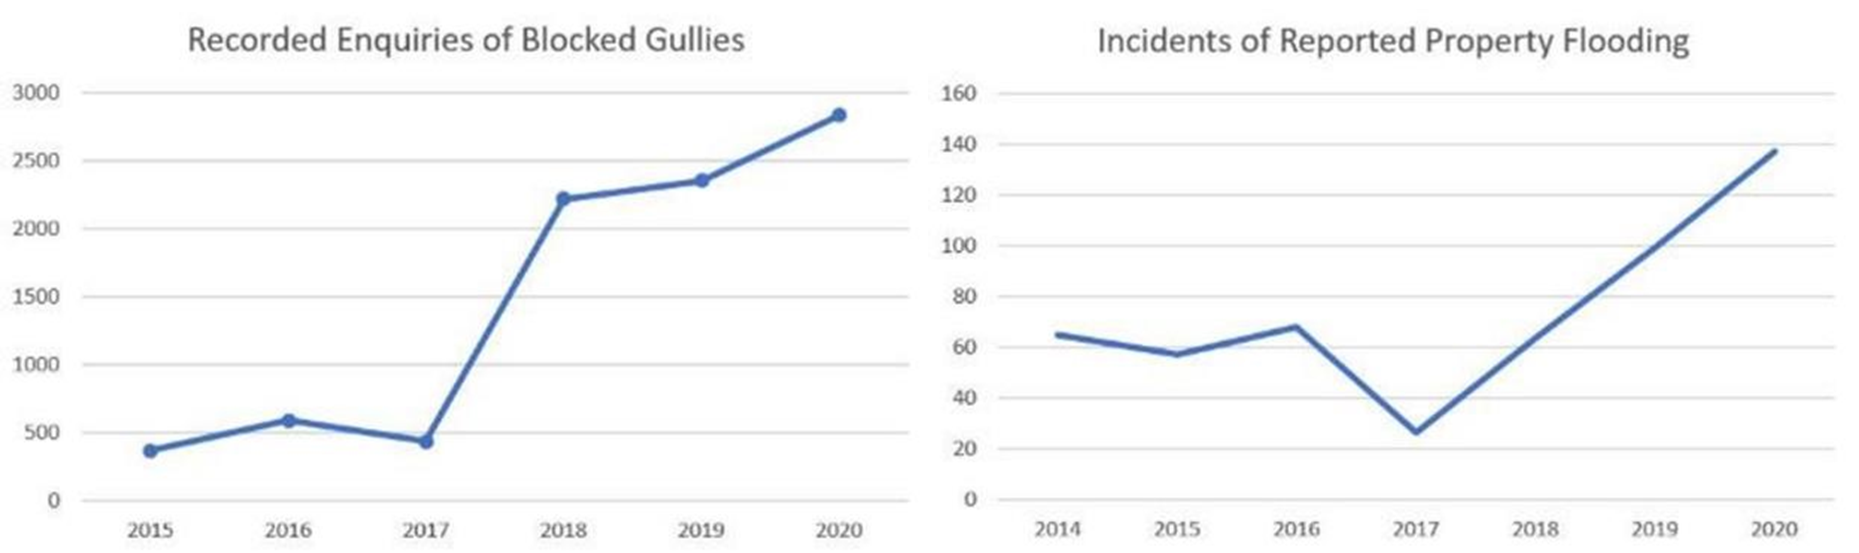 Recorded enquiries of blocked gullies - chart 